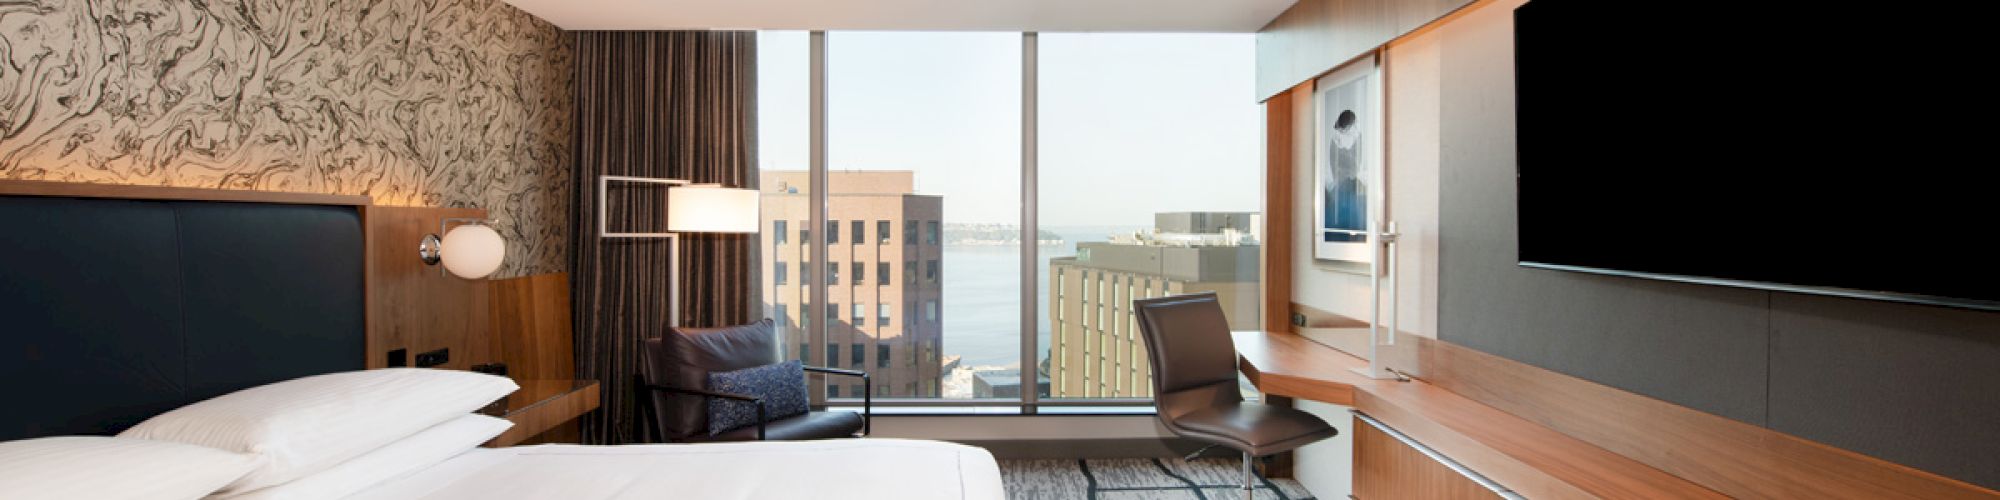 A modern hotel room features a large bed, a desk with a chair, a wall-mounted TV, and a window with a city and water view.